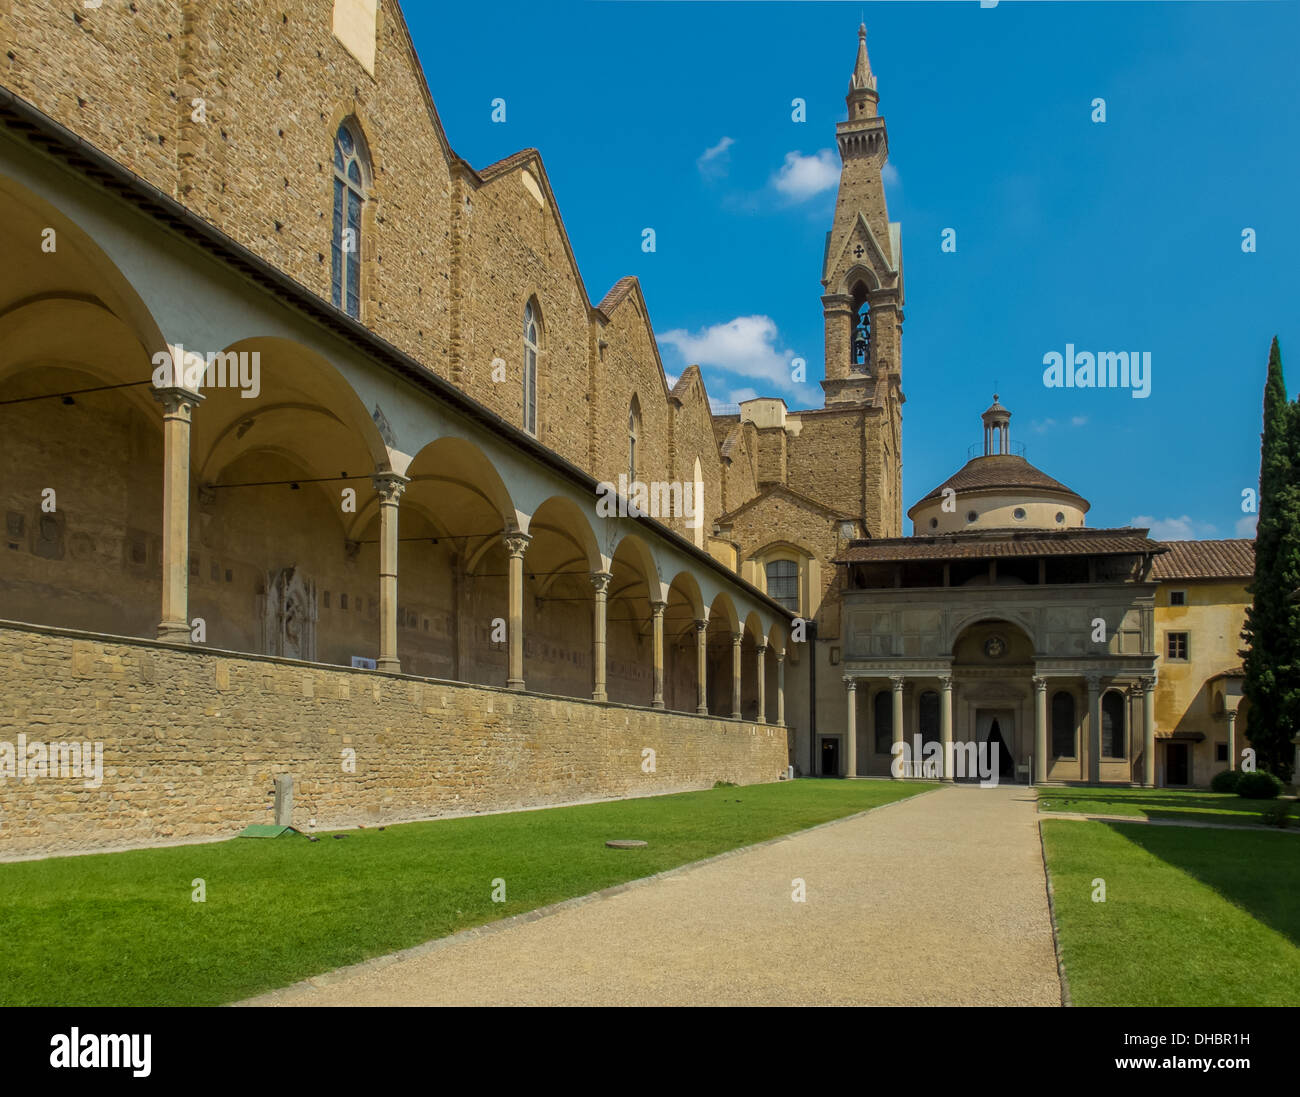 Courtyard of Basilica di Santa Croce. Cappella Pazzi entry in background. Florence, Italy Stock Photo